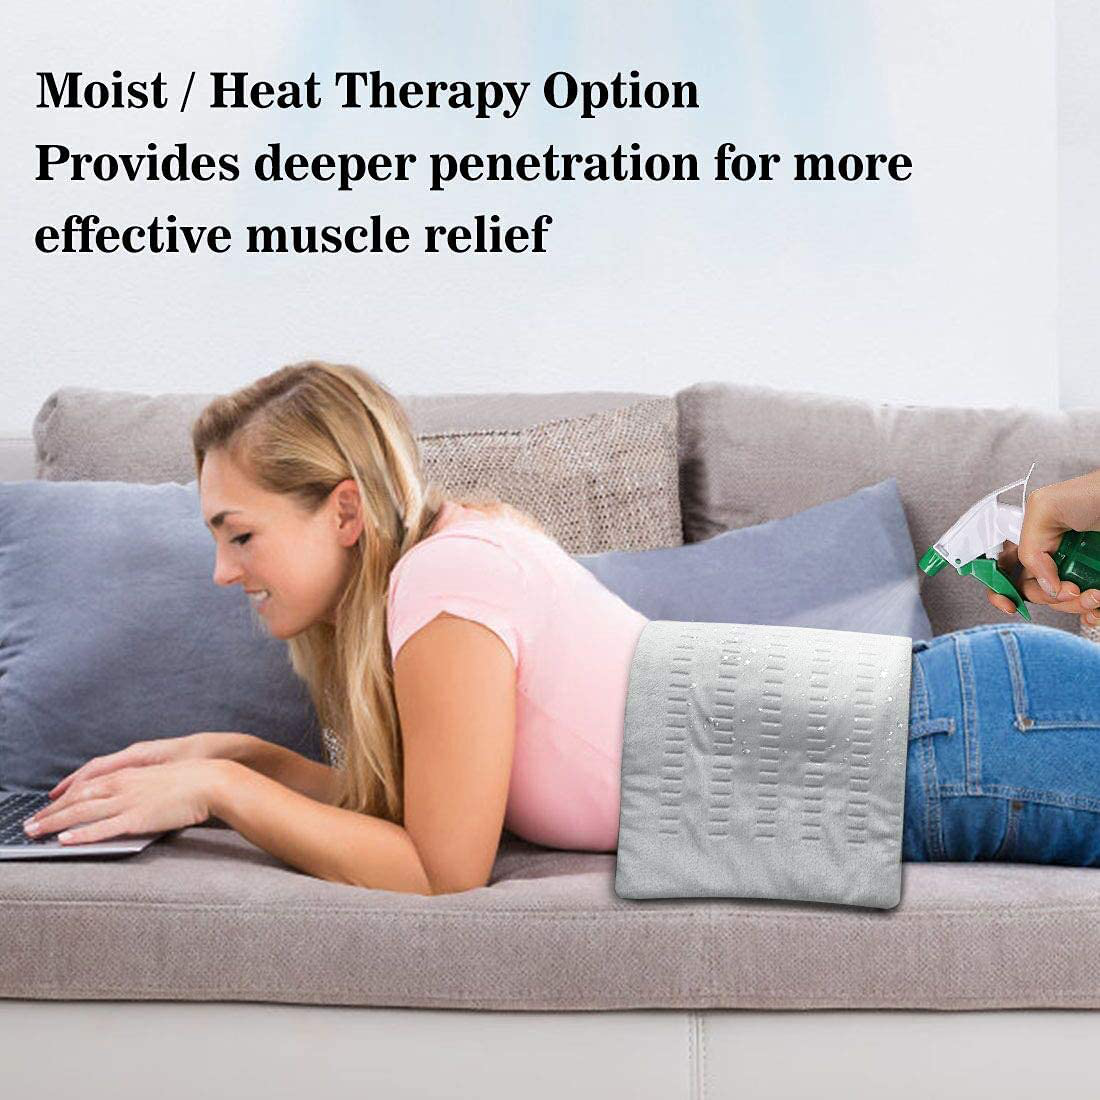 XL Electric Heating Pad for Back Pain and Cramps Relief, Ultra Soft Hot Heated Pad with Moist & Dry Heat Therapy and Auto Shut-Off for Neck, Shoulder, Leg,Menstrual Pain & Sore Muscle Relief